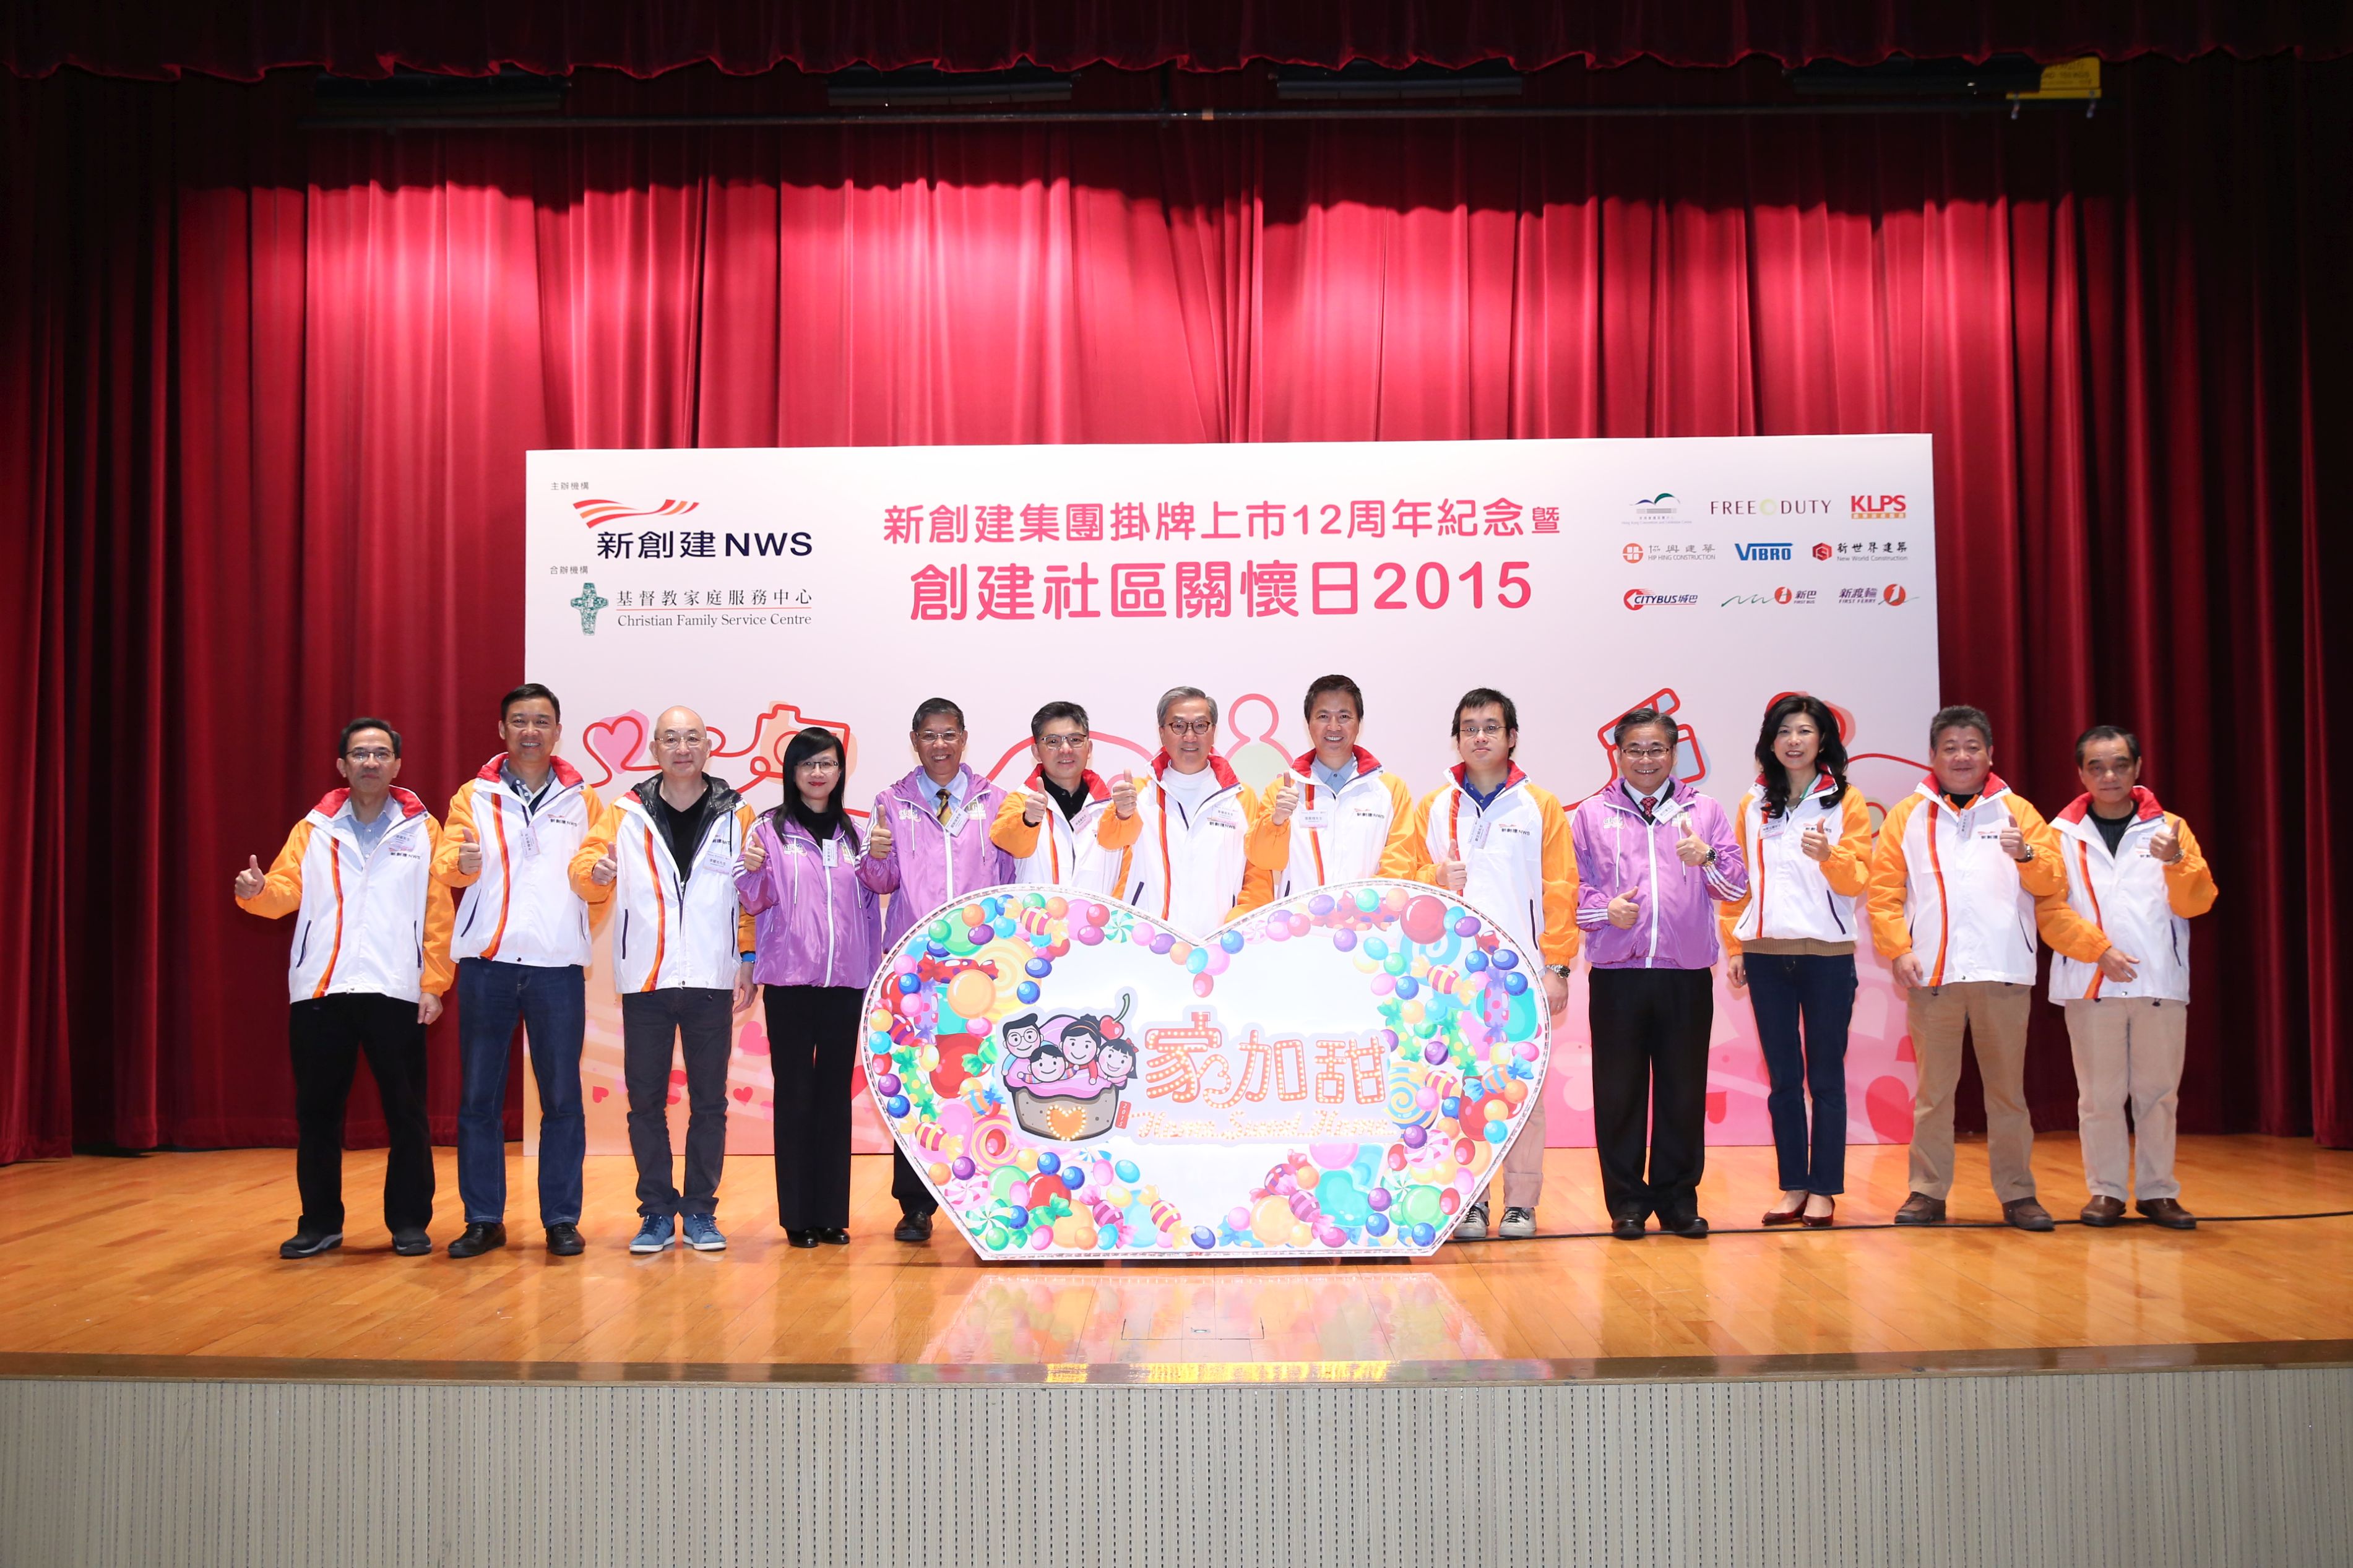 NWS Holdings celebrates 12th Anniversary by launching Home Sweet Home Volunteer Programme